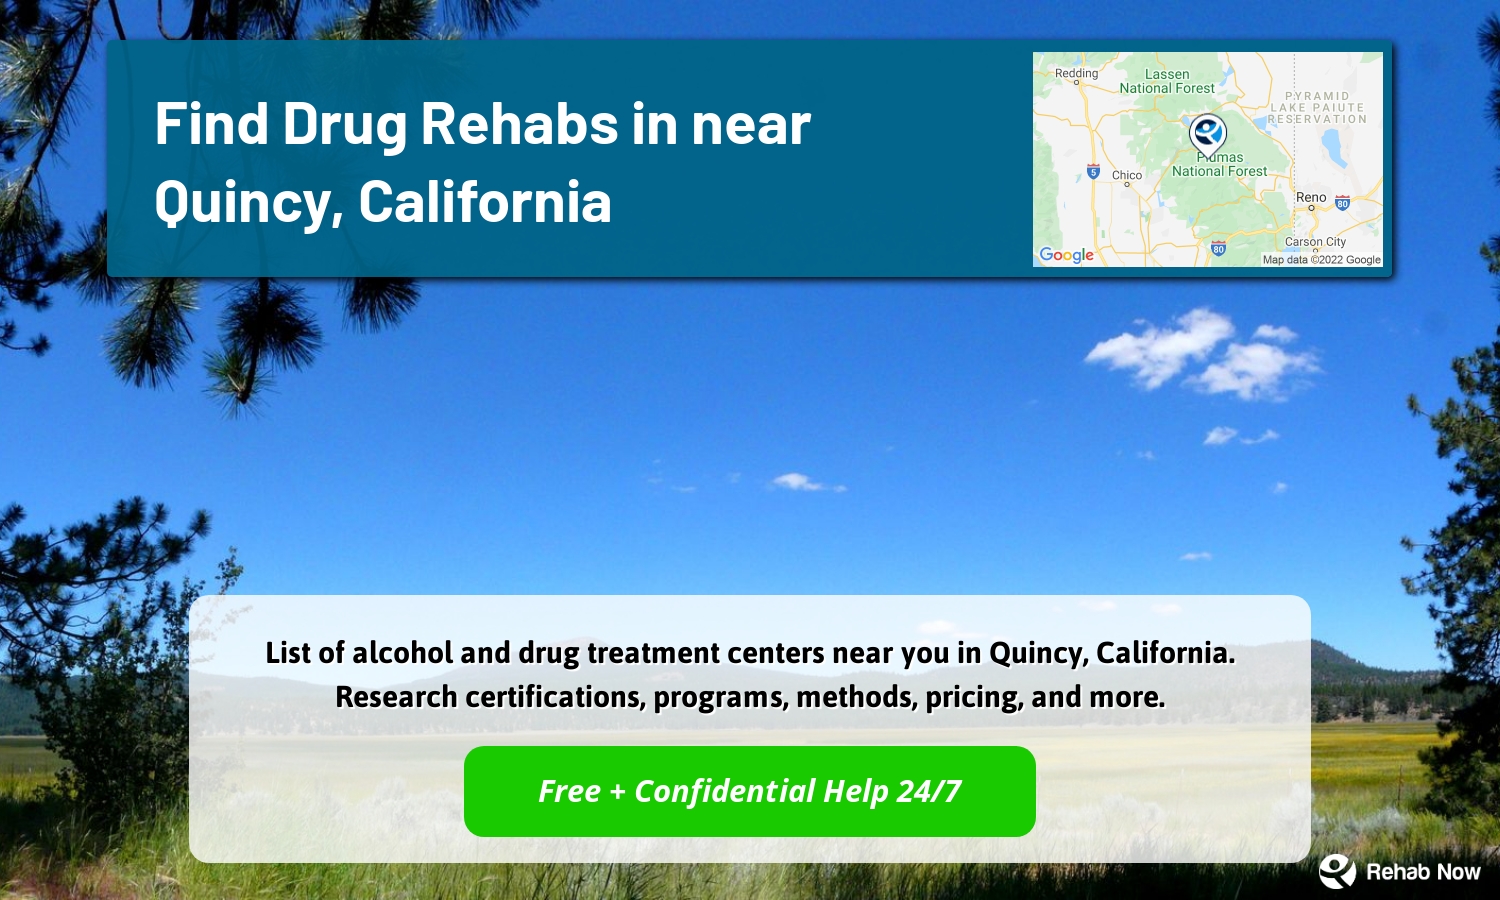 List of alcohol and drug treatment centers near you in Quincy, California. Research certifications, programs, methods, pricing, and more.